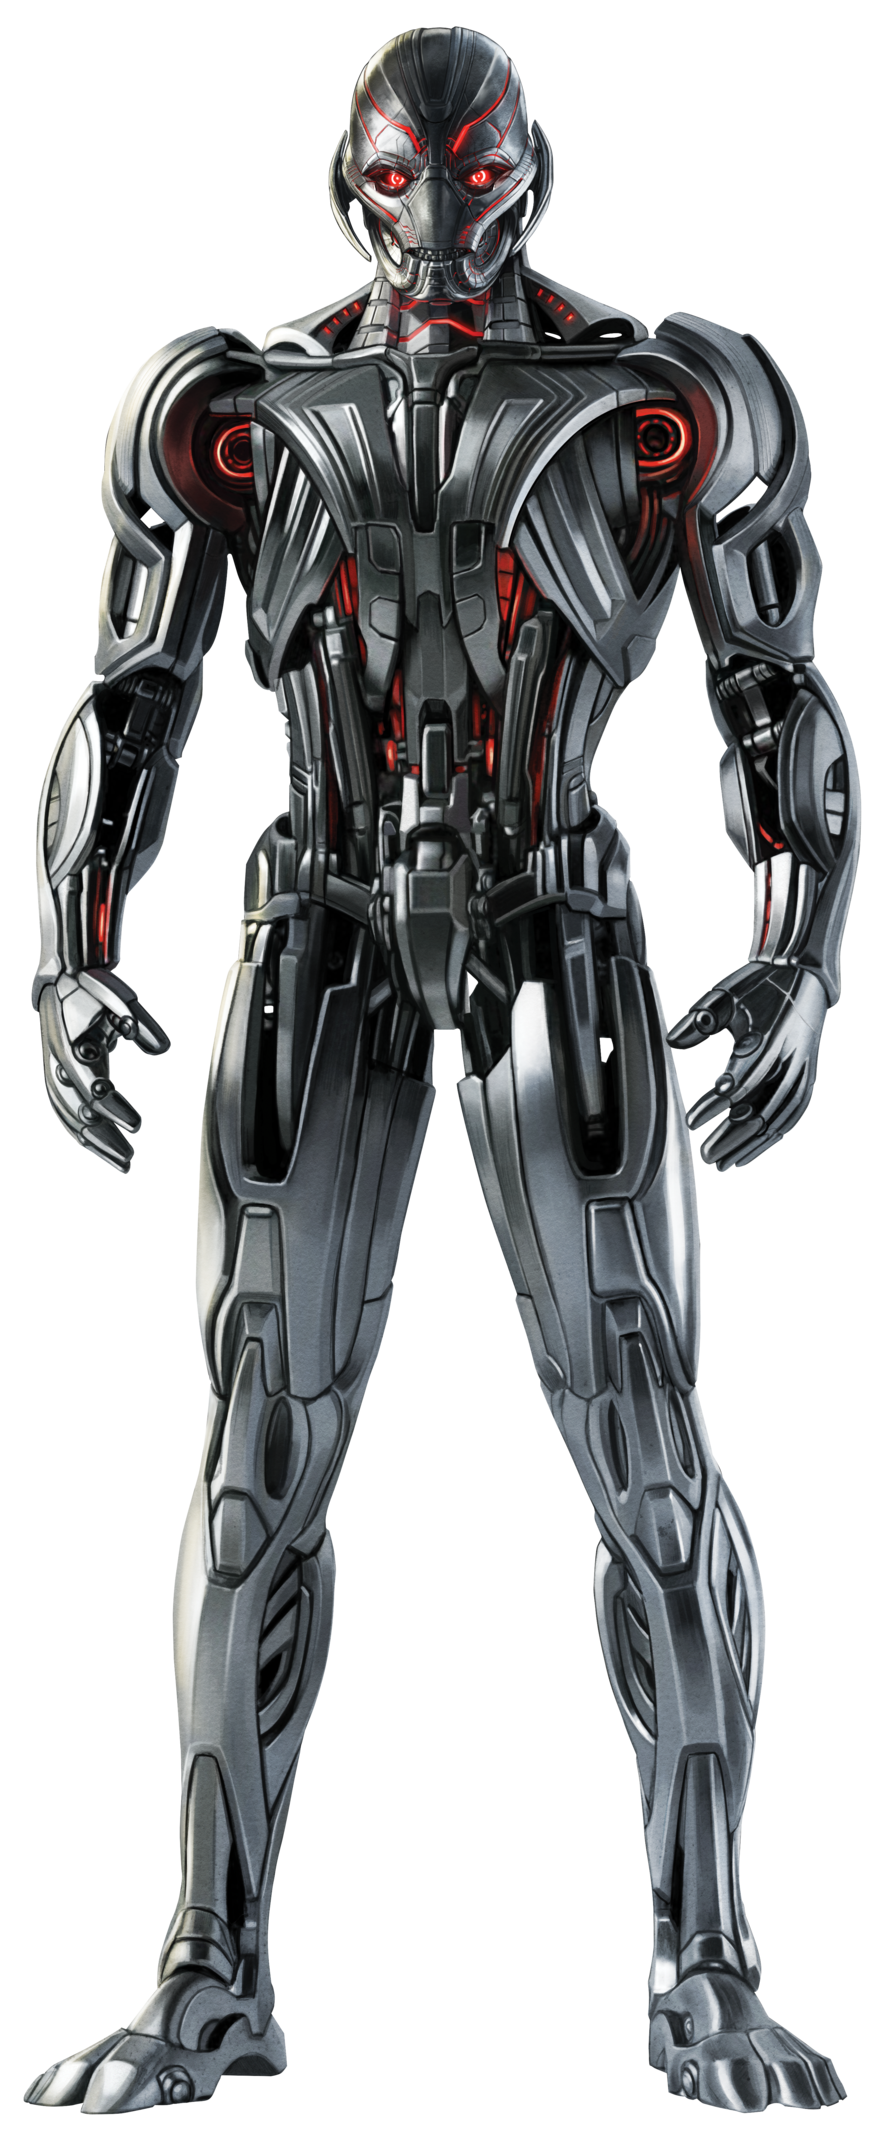 Ultron (Marvel Cinematic Universe)/Gallery